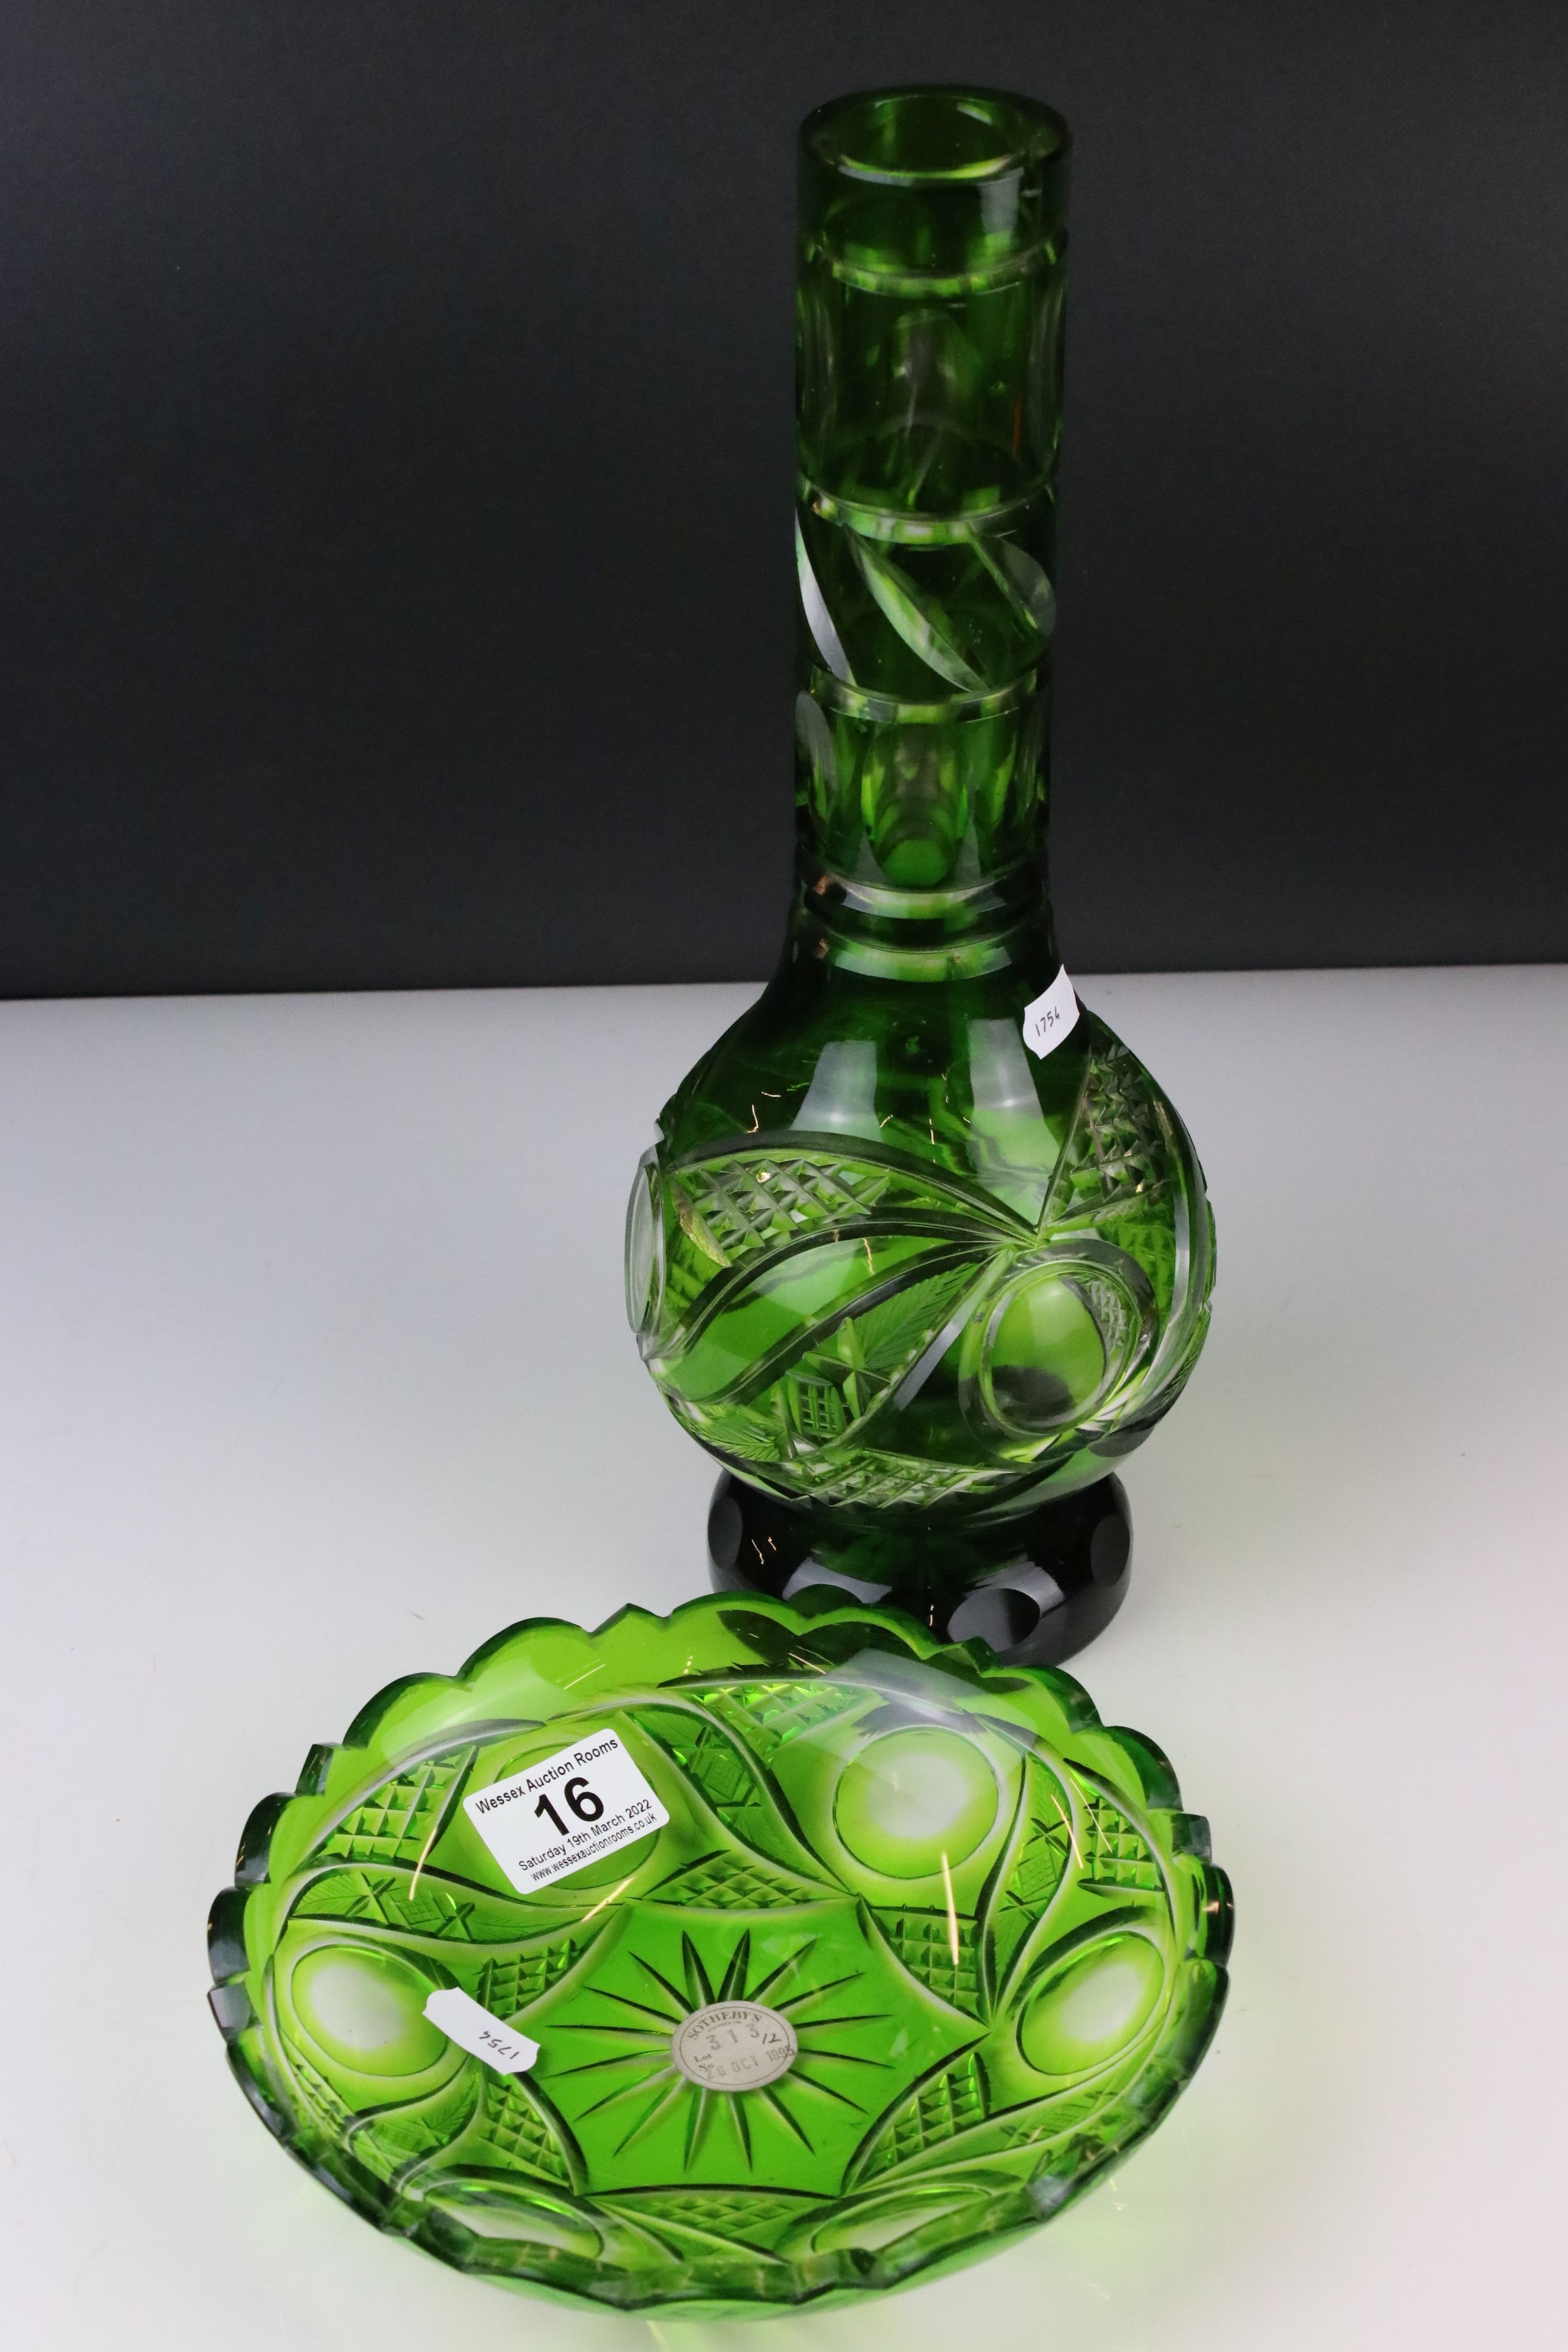 Bohemian Green Overlaid Cut Glass Carafe 35cm high together with a matching Stand / Dish (dish